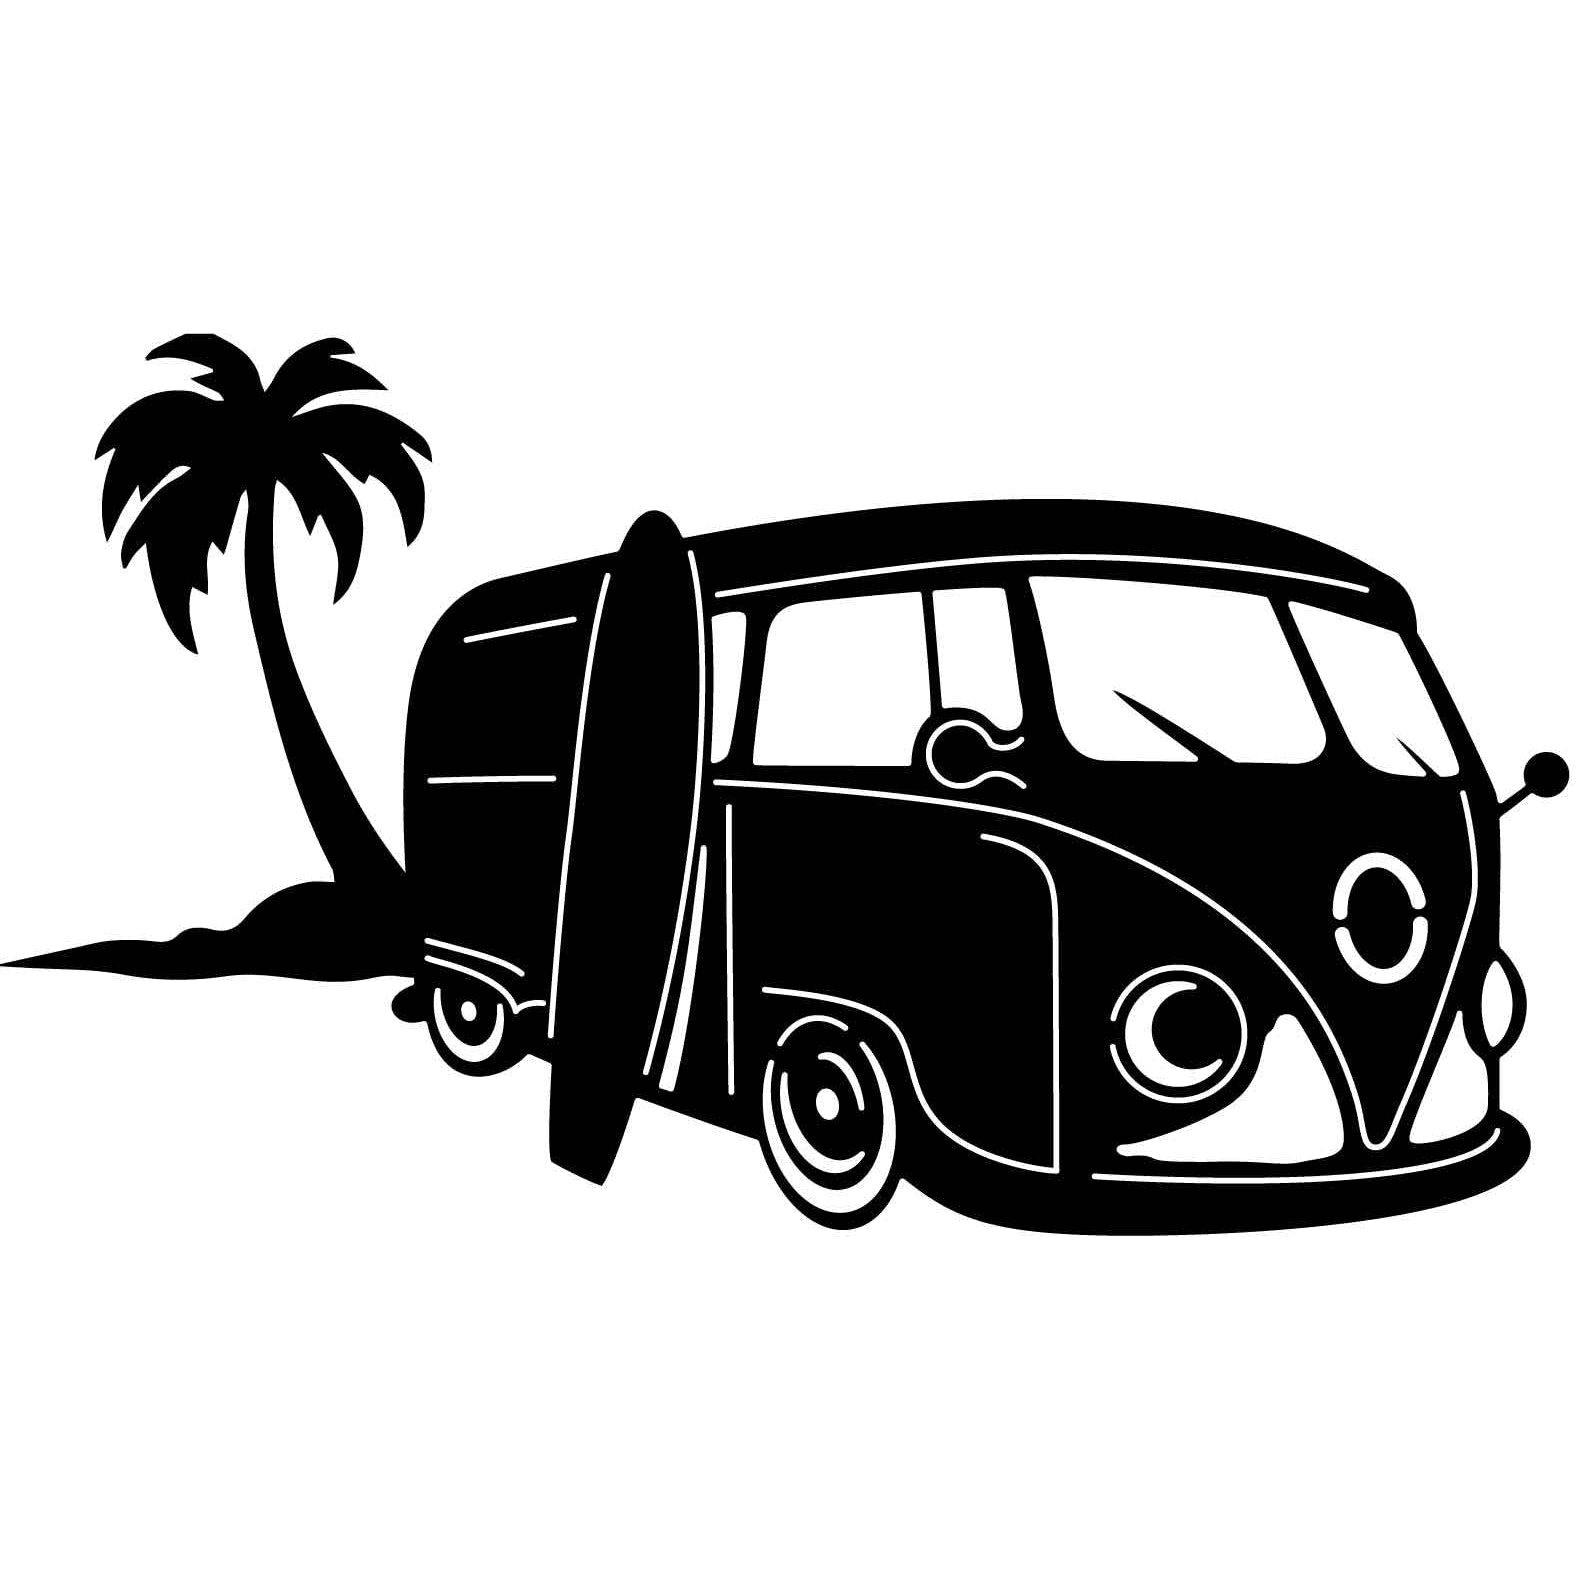 Kombi Bus in Beach view-DXF file cut ready for cnc machines-DXFforCNC.com